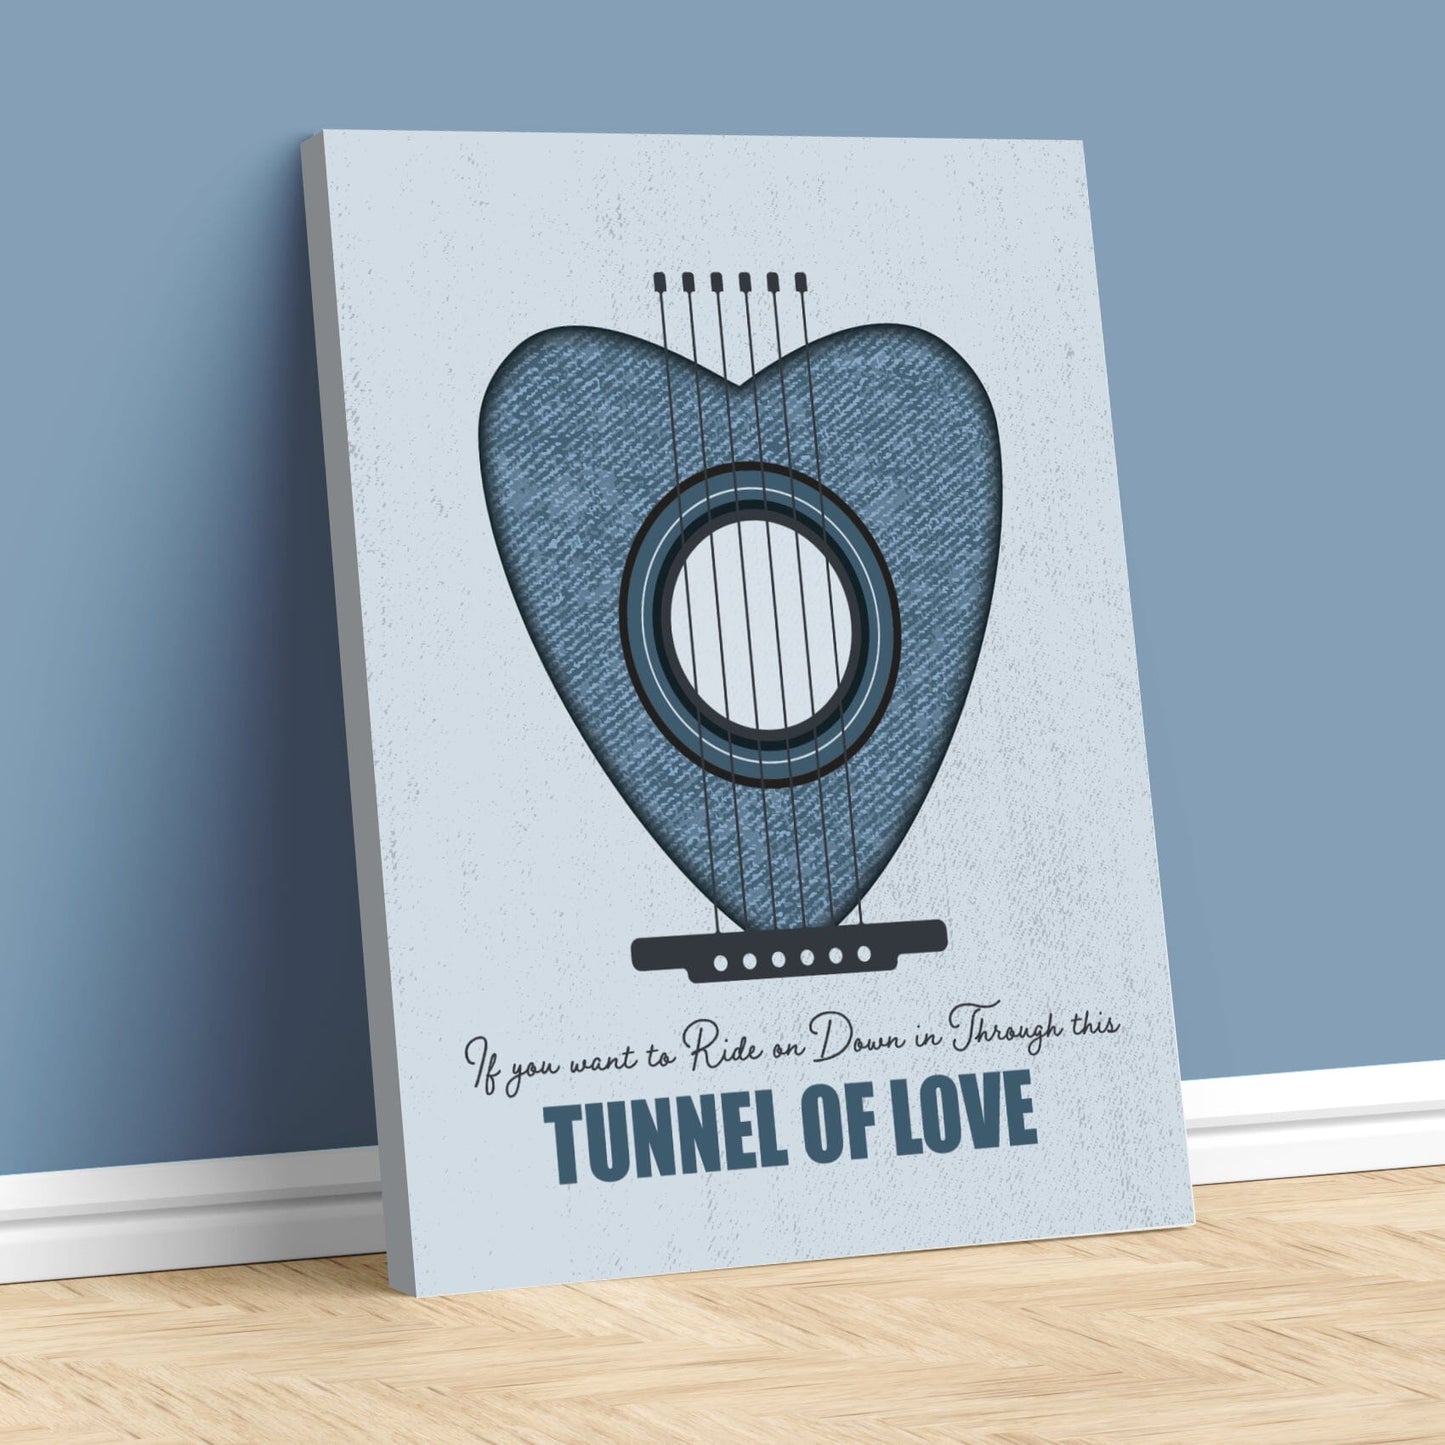 Tunnel of Love by Bruce Springsteen - Lyric Rock Music Art Song Lyrics Art Song Lyrics Art 11x14 Canvas Wrap 